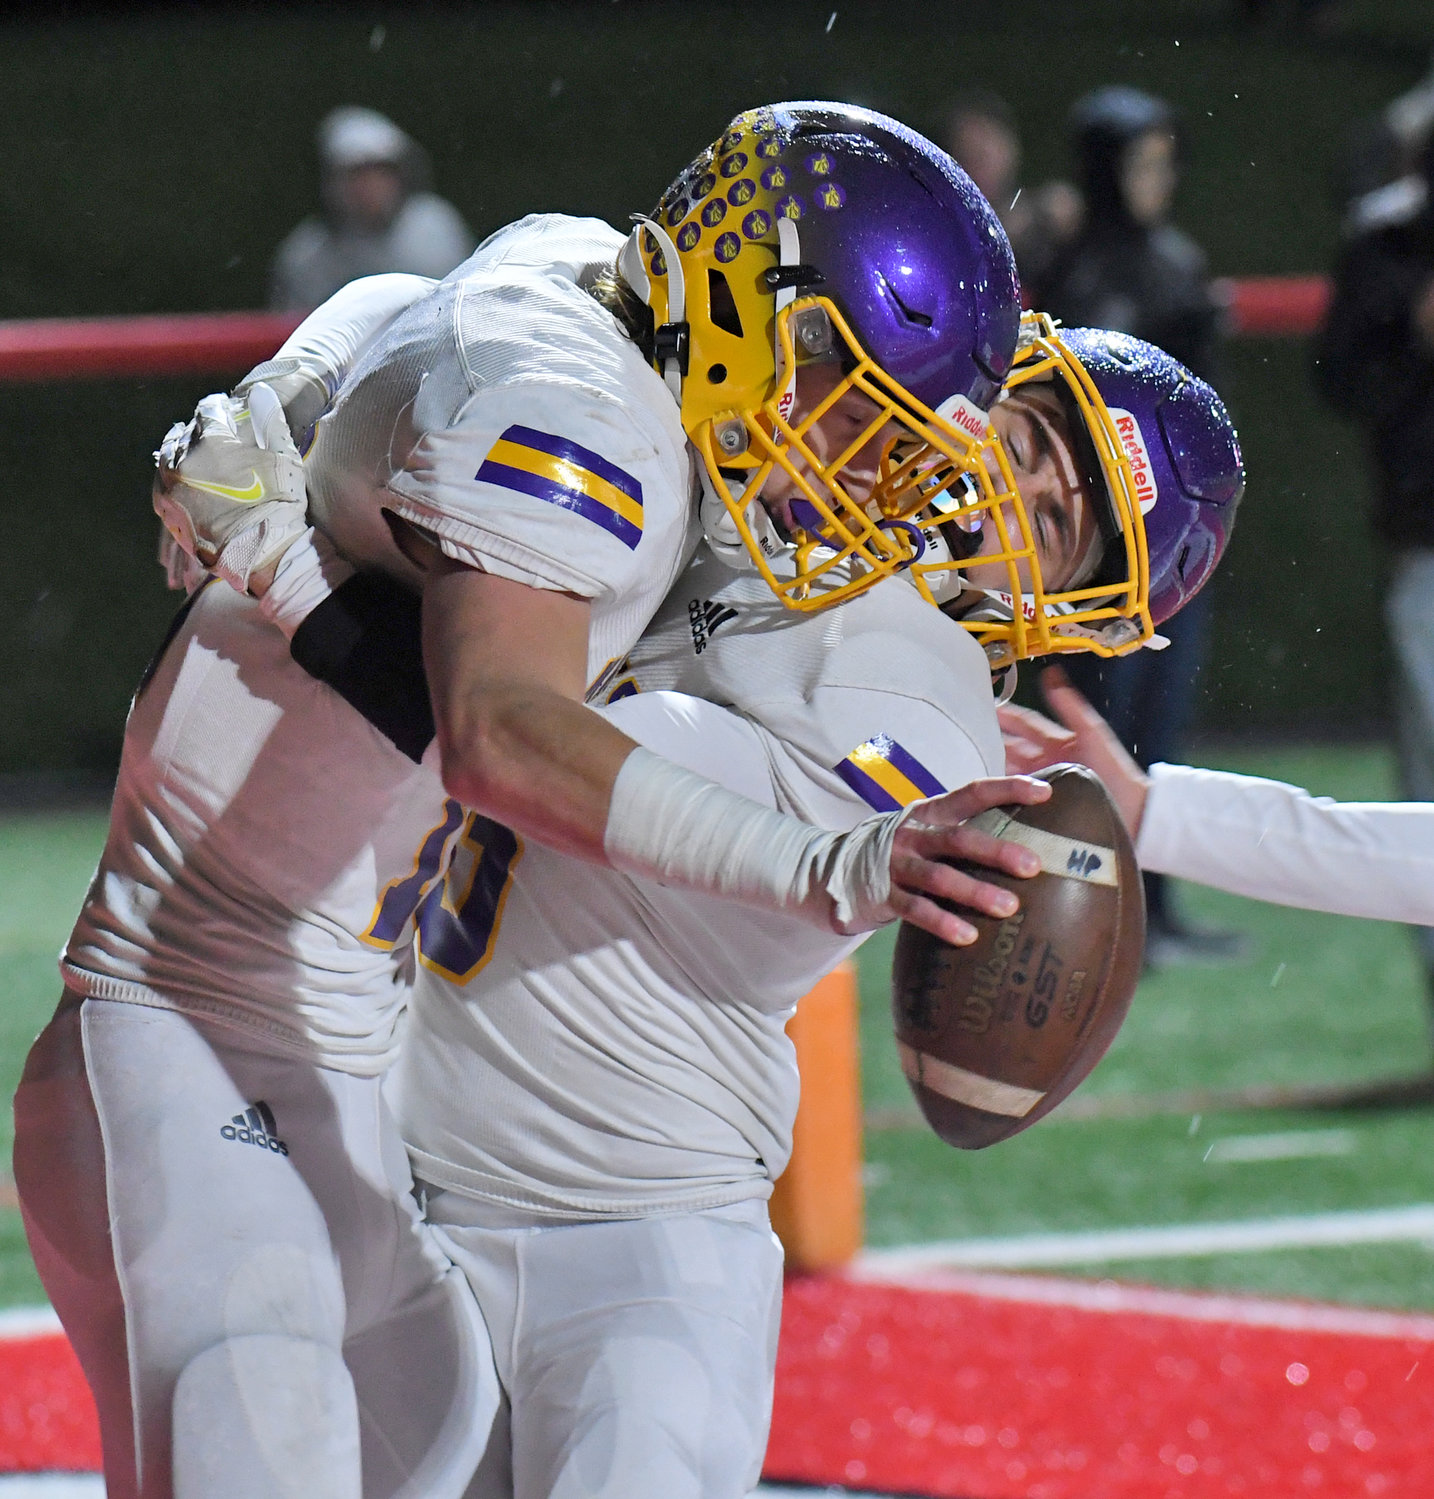 Holland Patent senior tight end Nick Deforrest, left, gets a big hug from teammate Jordan Carhart after catching a touchdown pass late in the second quarter at Vernon-Verona-Sherrill Friday night. Deforrest caught two scores from Aidan Rubas to get the Golden Knights a 14-6 win in Class C.